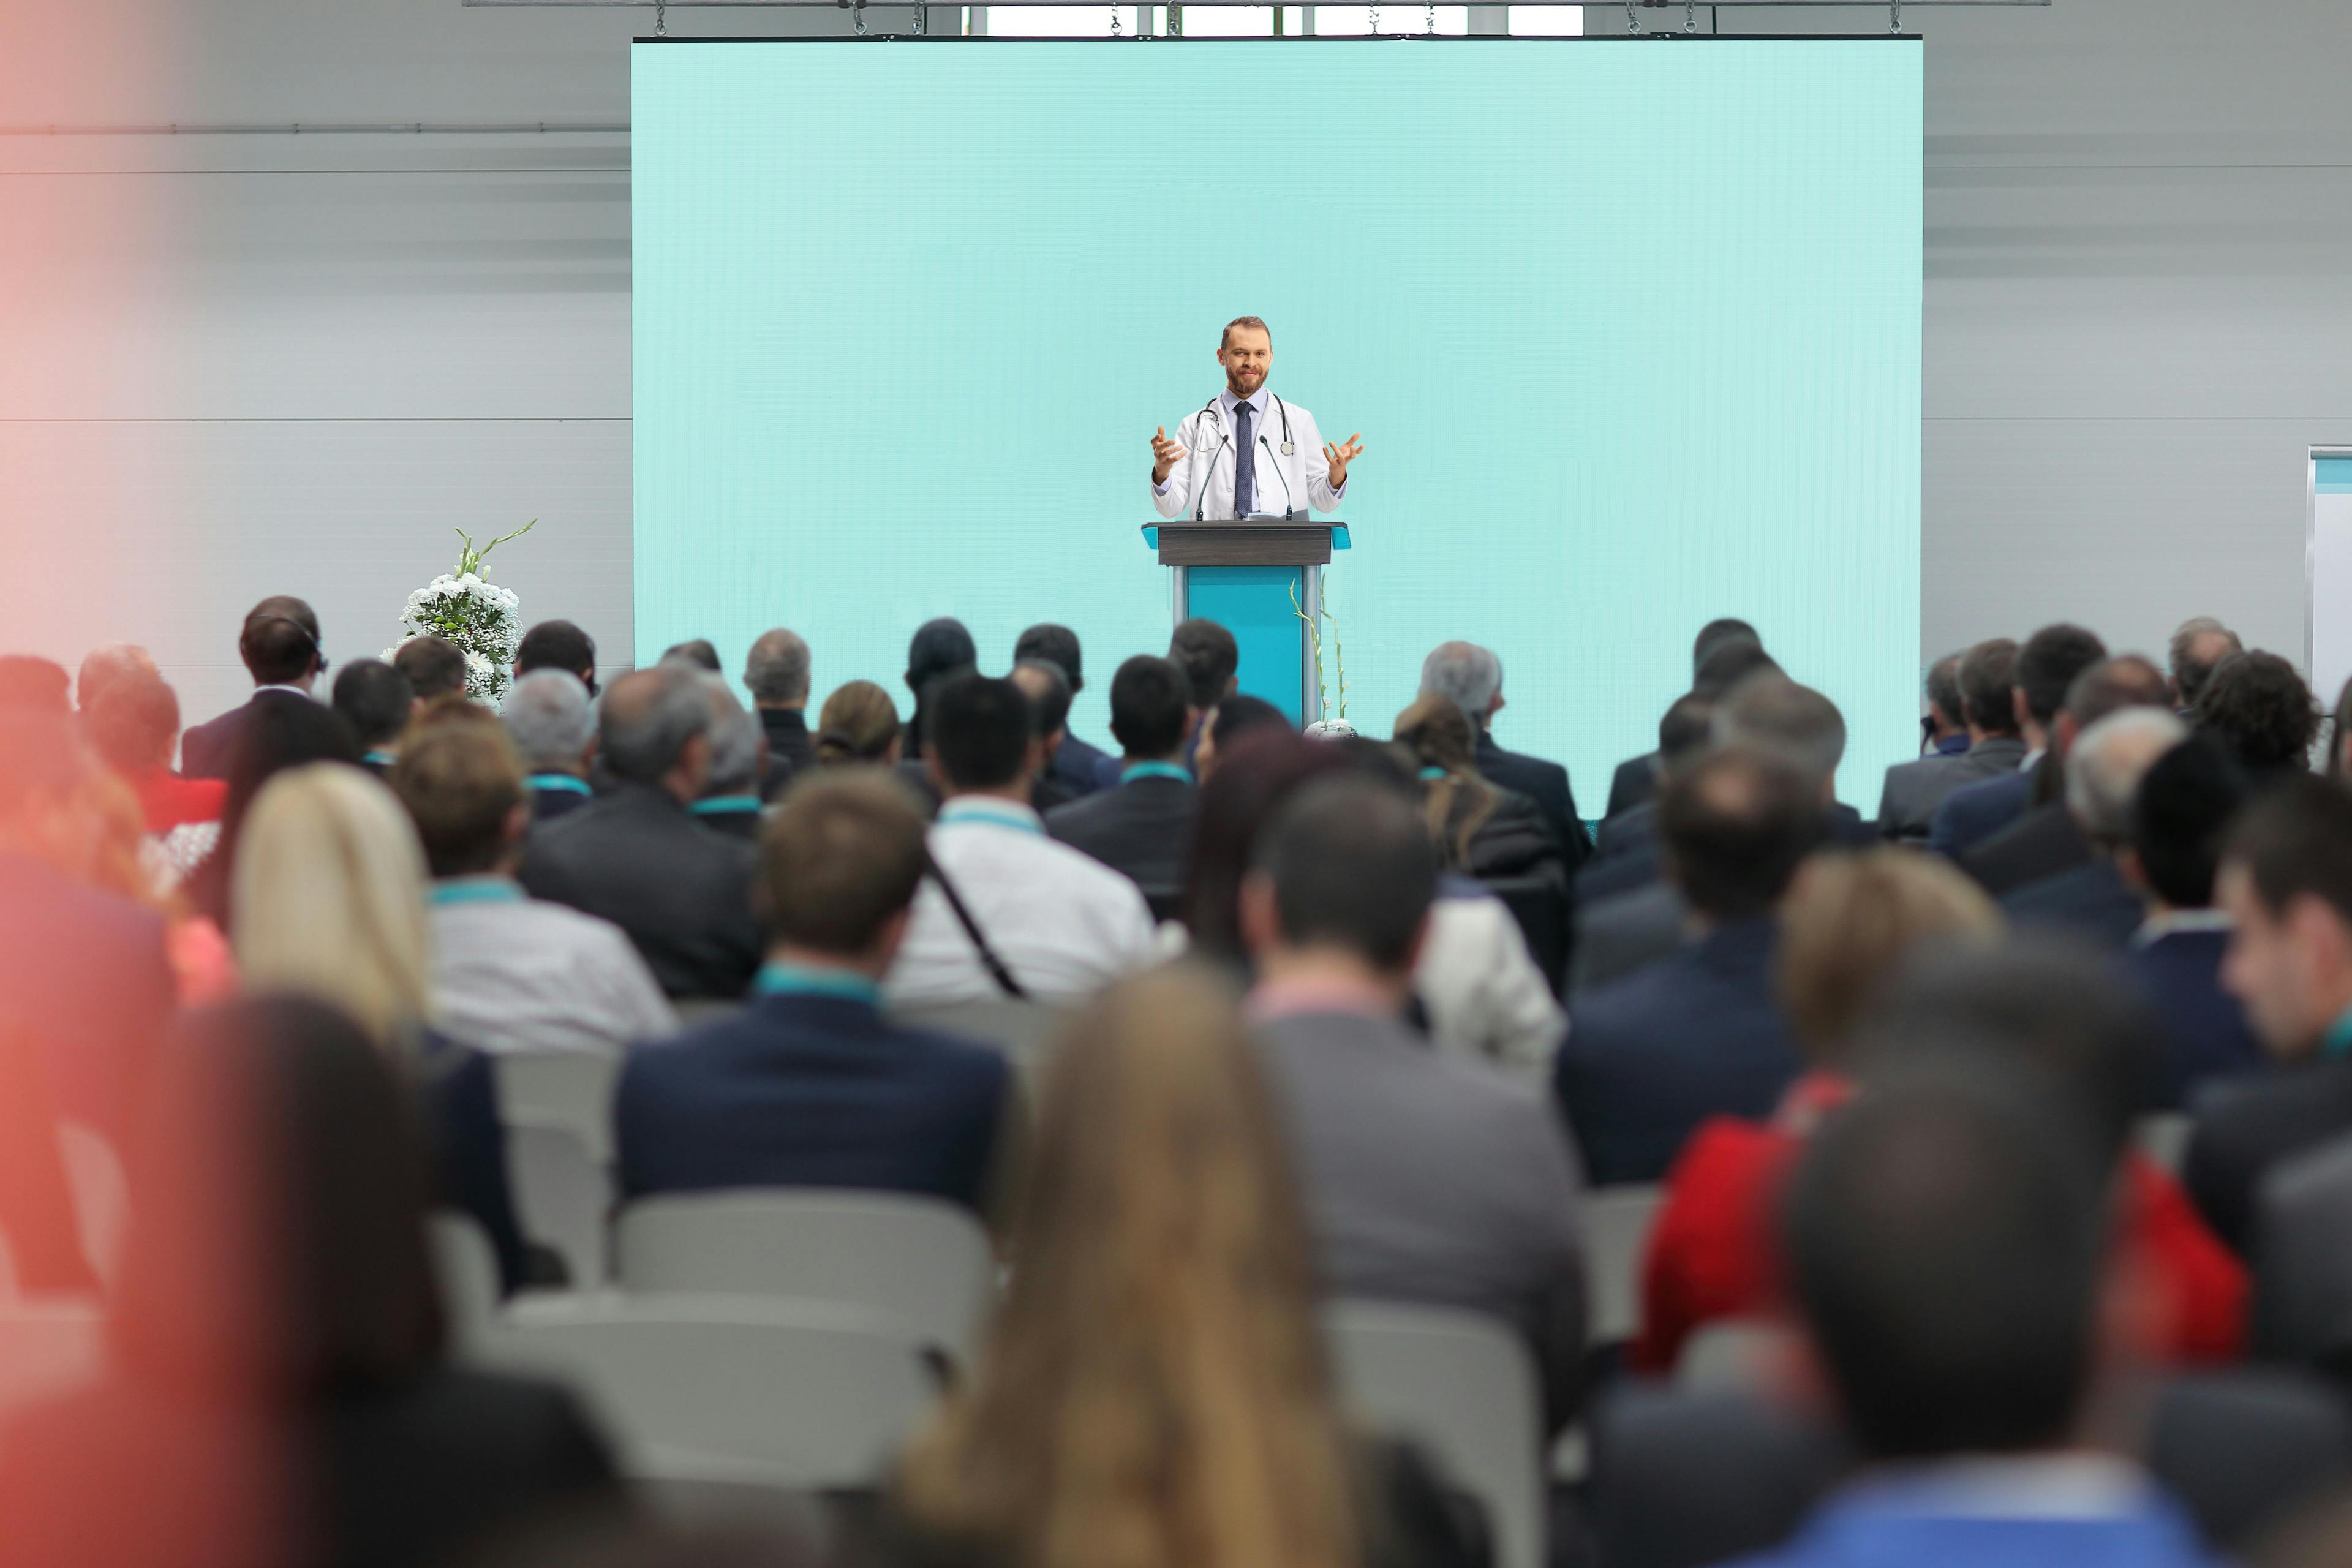 Male doctor giving a speech on a podium at a conference | Image credit: Ljupco Smokovski - stock.adobe.com